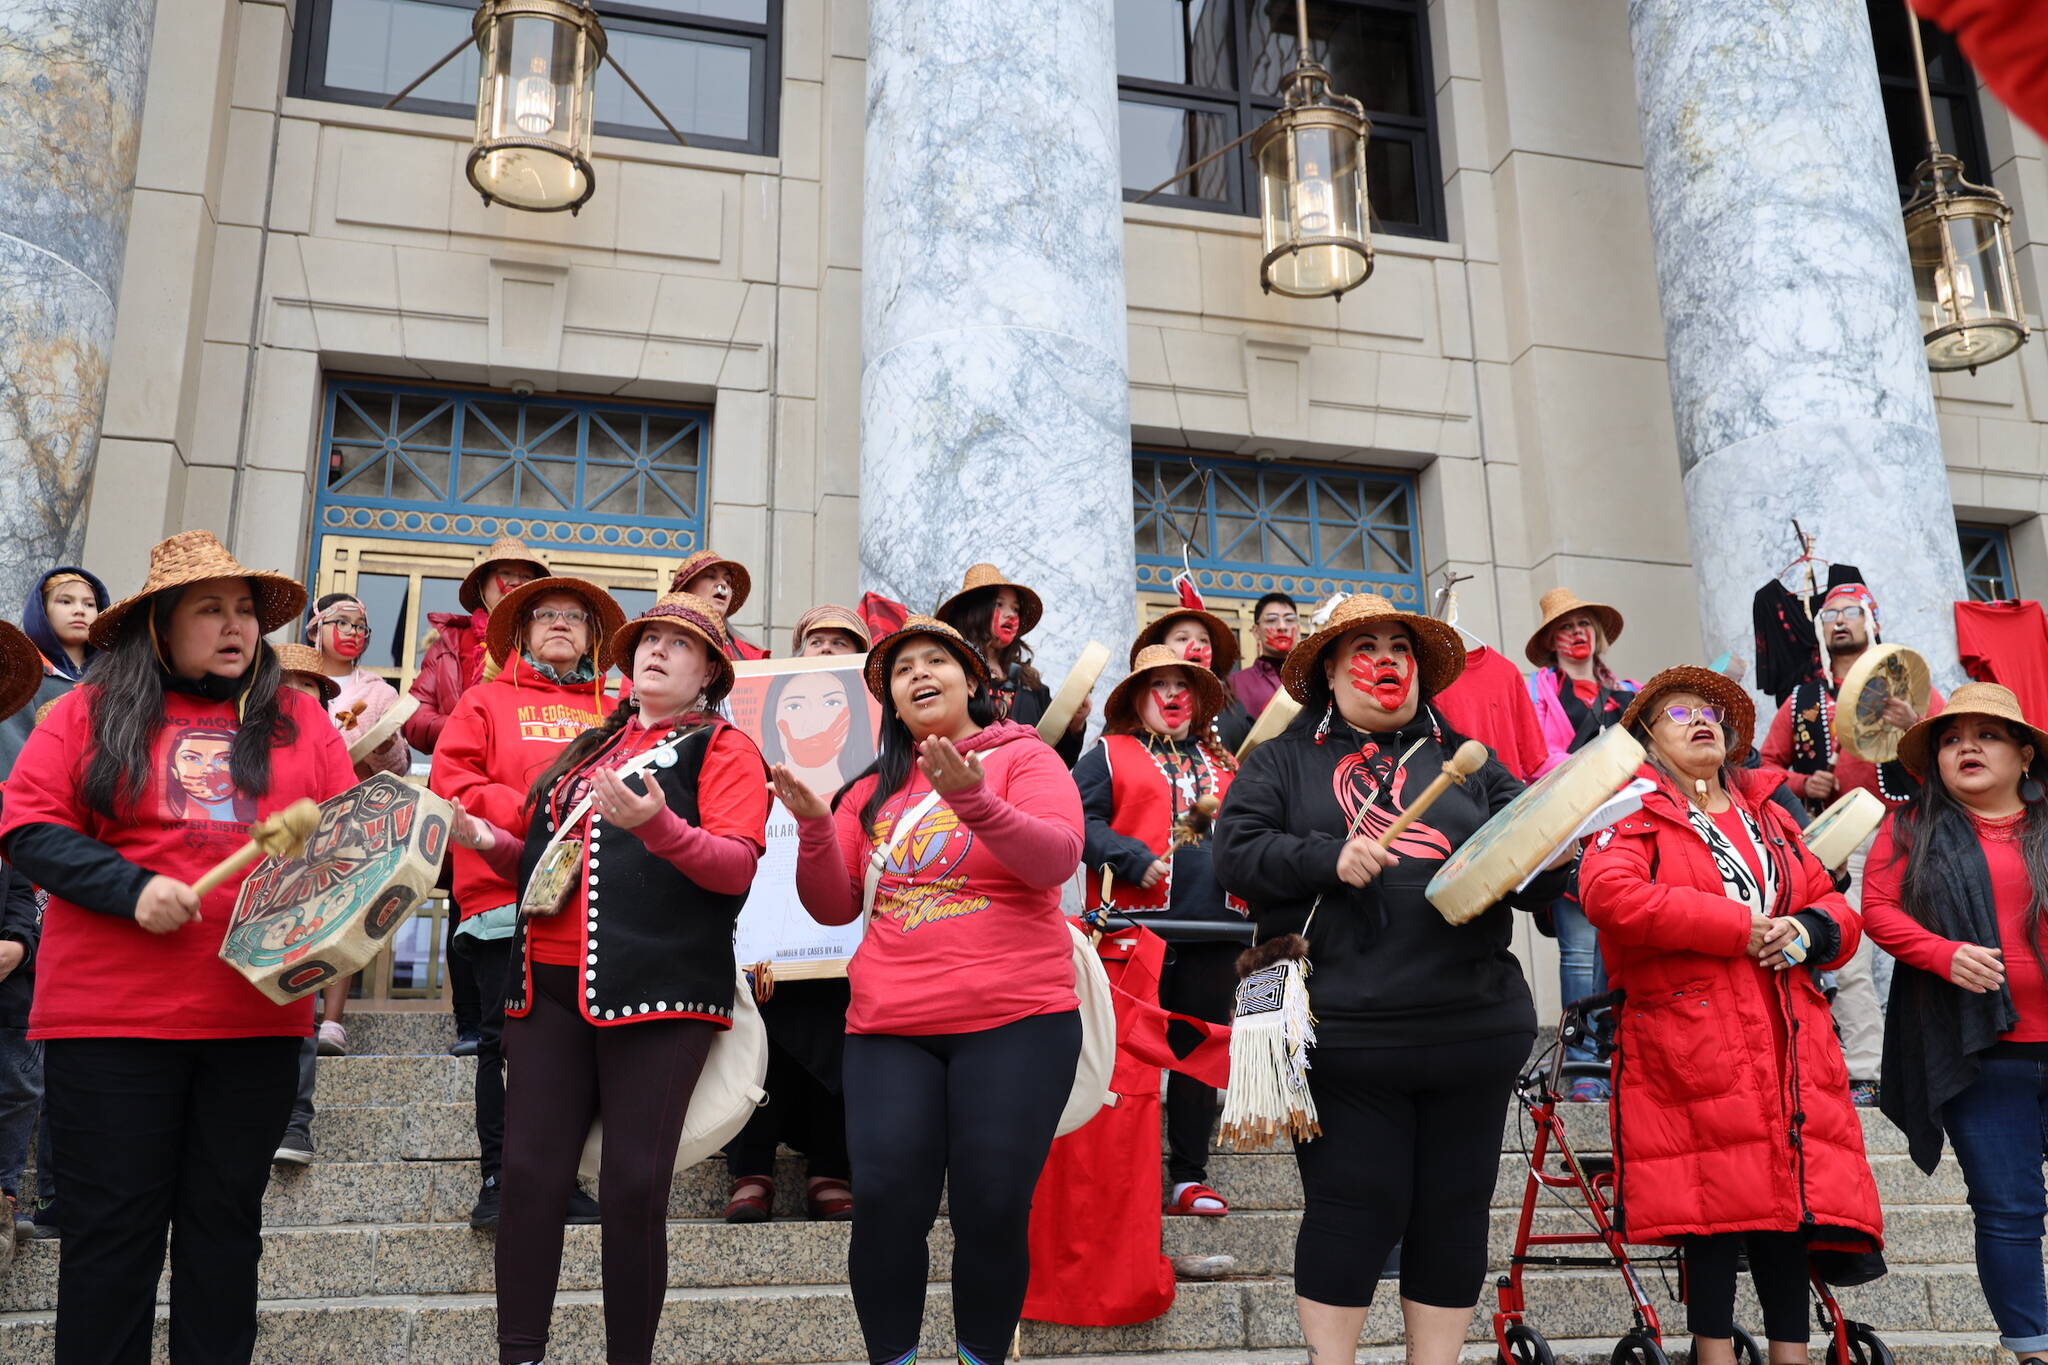 Bamby Kinville-James (left center) and Jeni Brown (right center) lead a song during the rally held at the steps of the Alaska State Capitol Friday evening to recognize Missing and Murdered Indigenous Peoples Awareness Day held each year on May 5. (Clarise Larson / Juneau Empire)